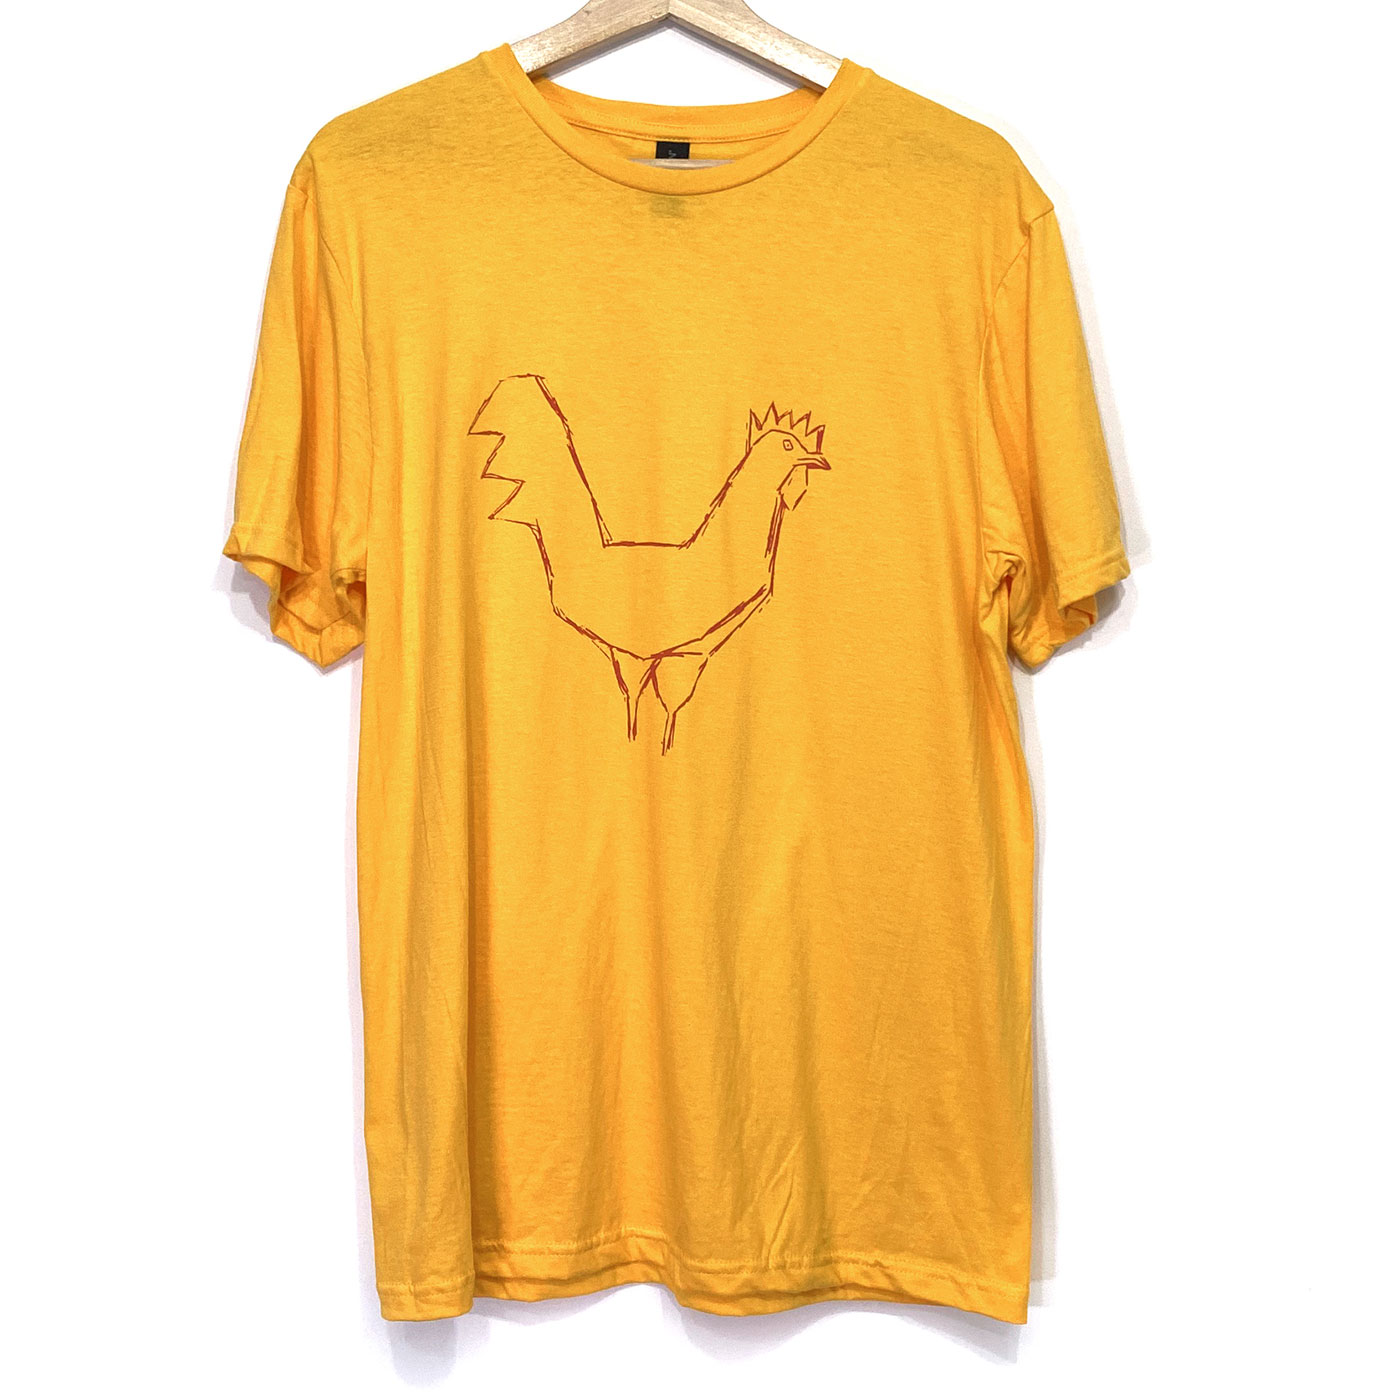 A red chicken silkscreen on the front of a bright yellow tee